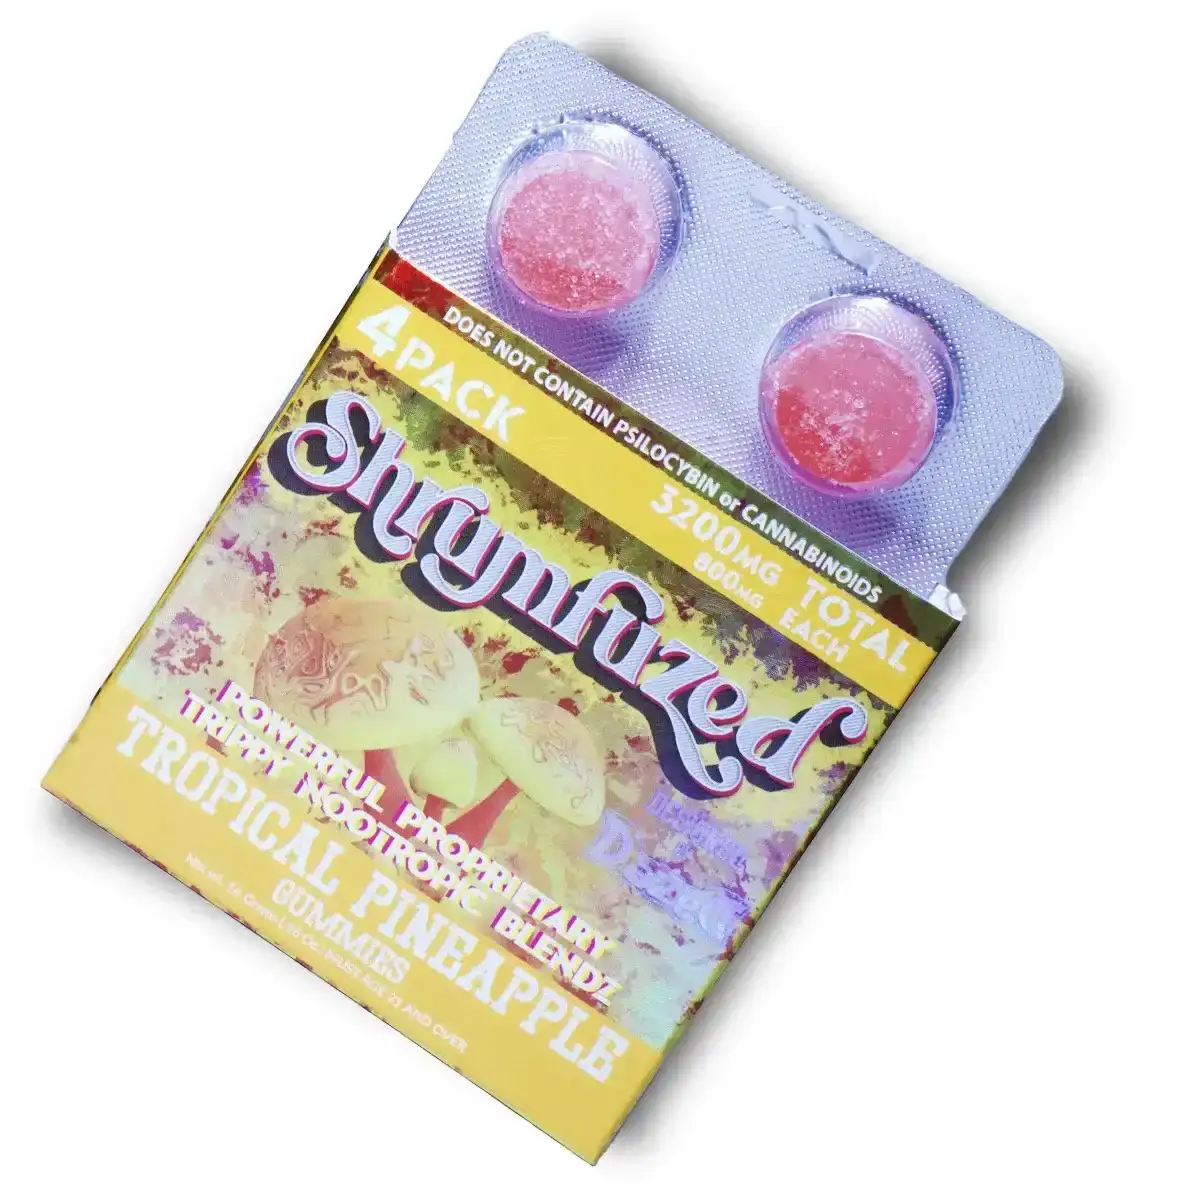 Image of Shrumfuzed Nootropic Trippy Psychedelic Mushroom Gummies 4 Piece - Tropical Pineapple